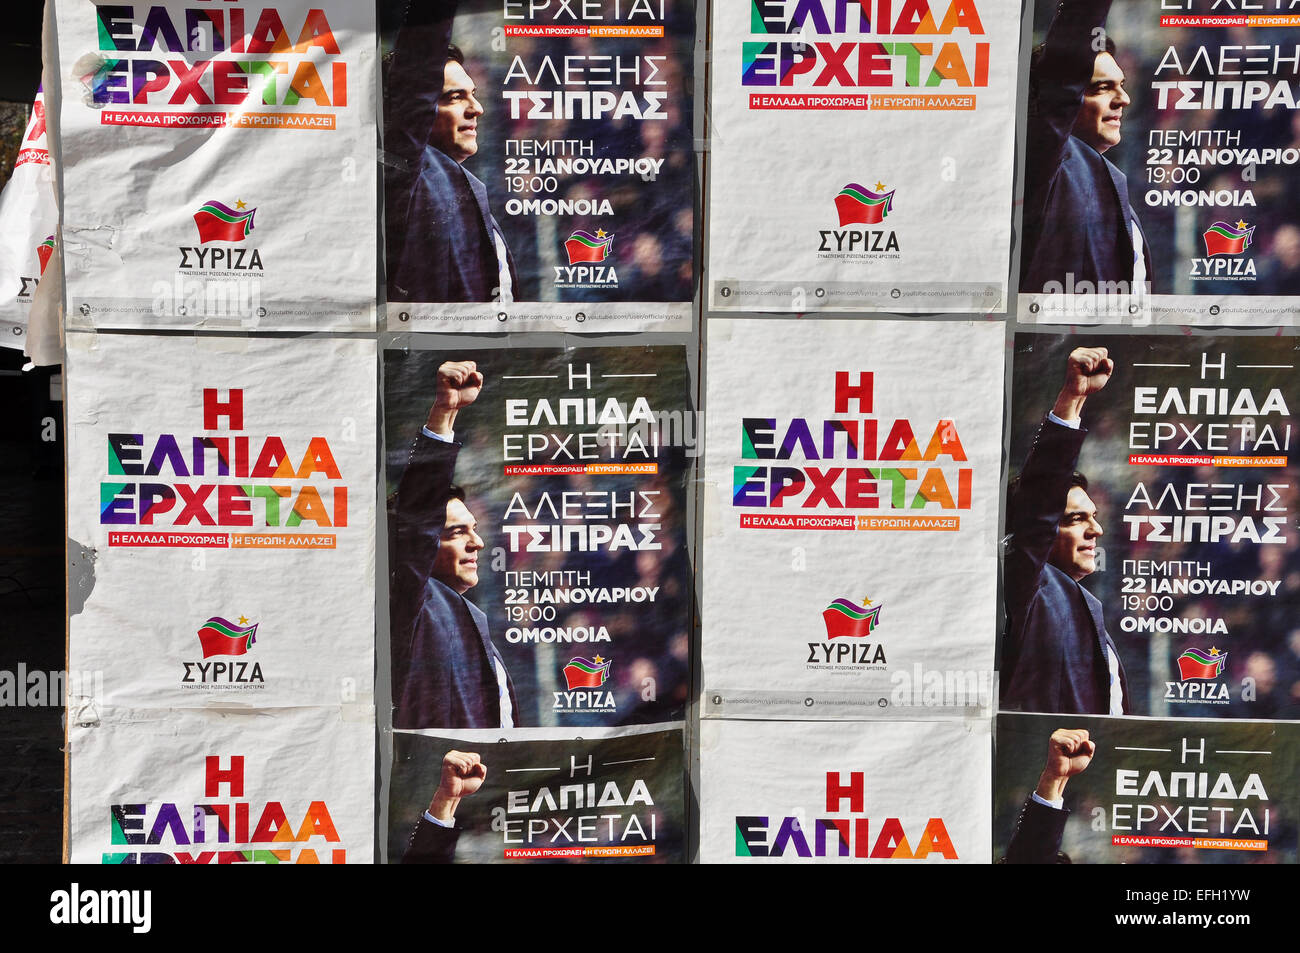 Political campaign posters for Syriza - Coalition of the Radical Left winner of the January 25, 2015 greek national elections. Stock Photo